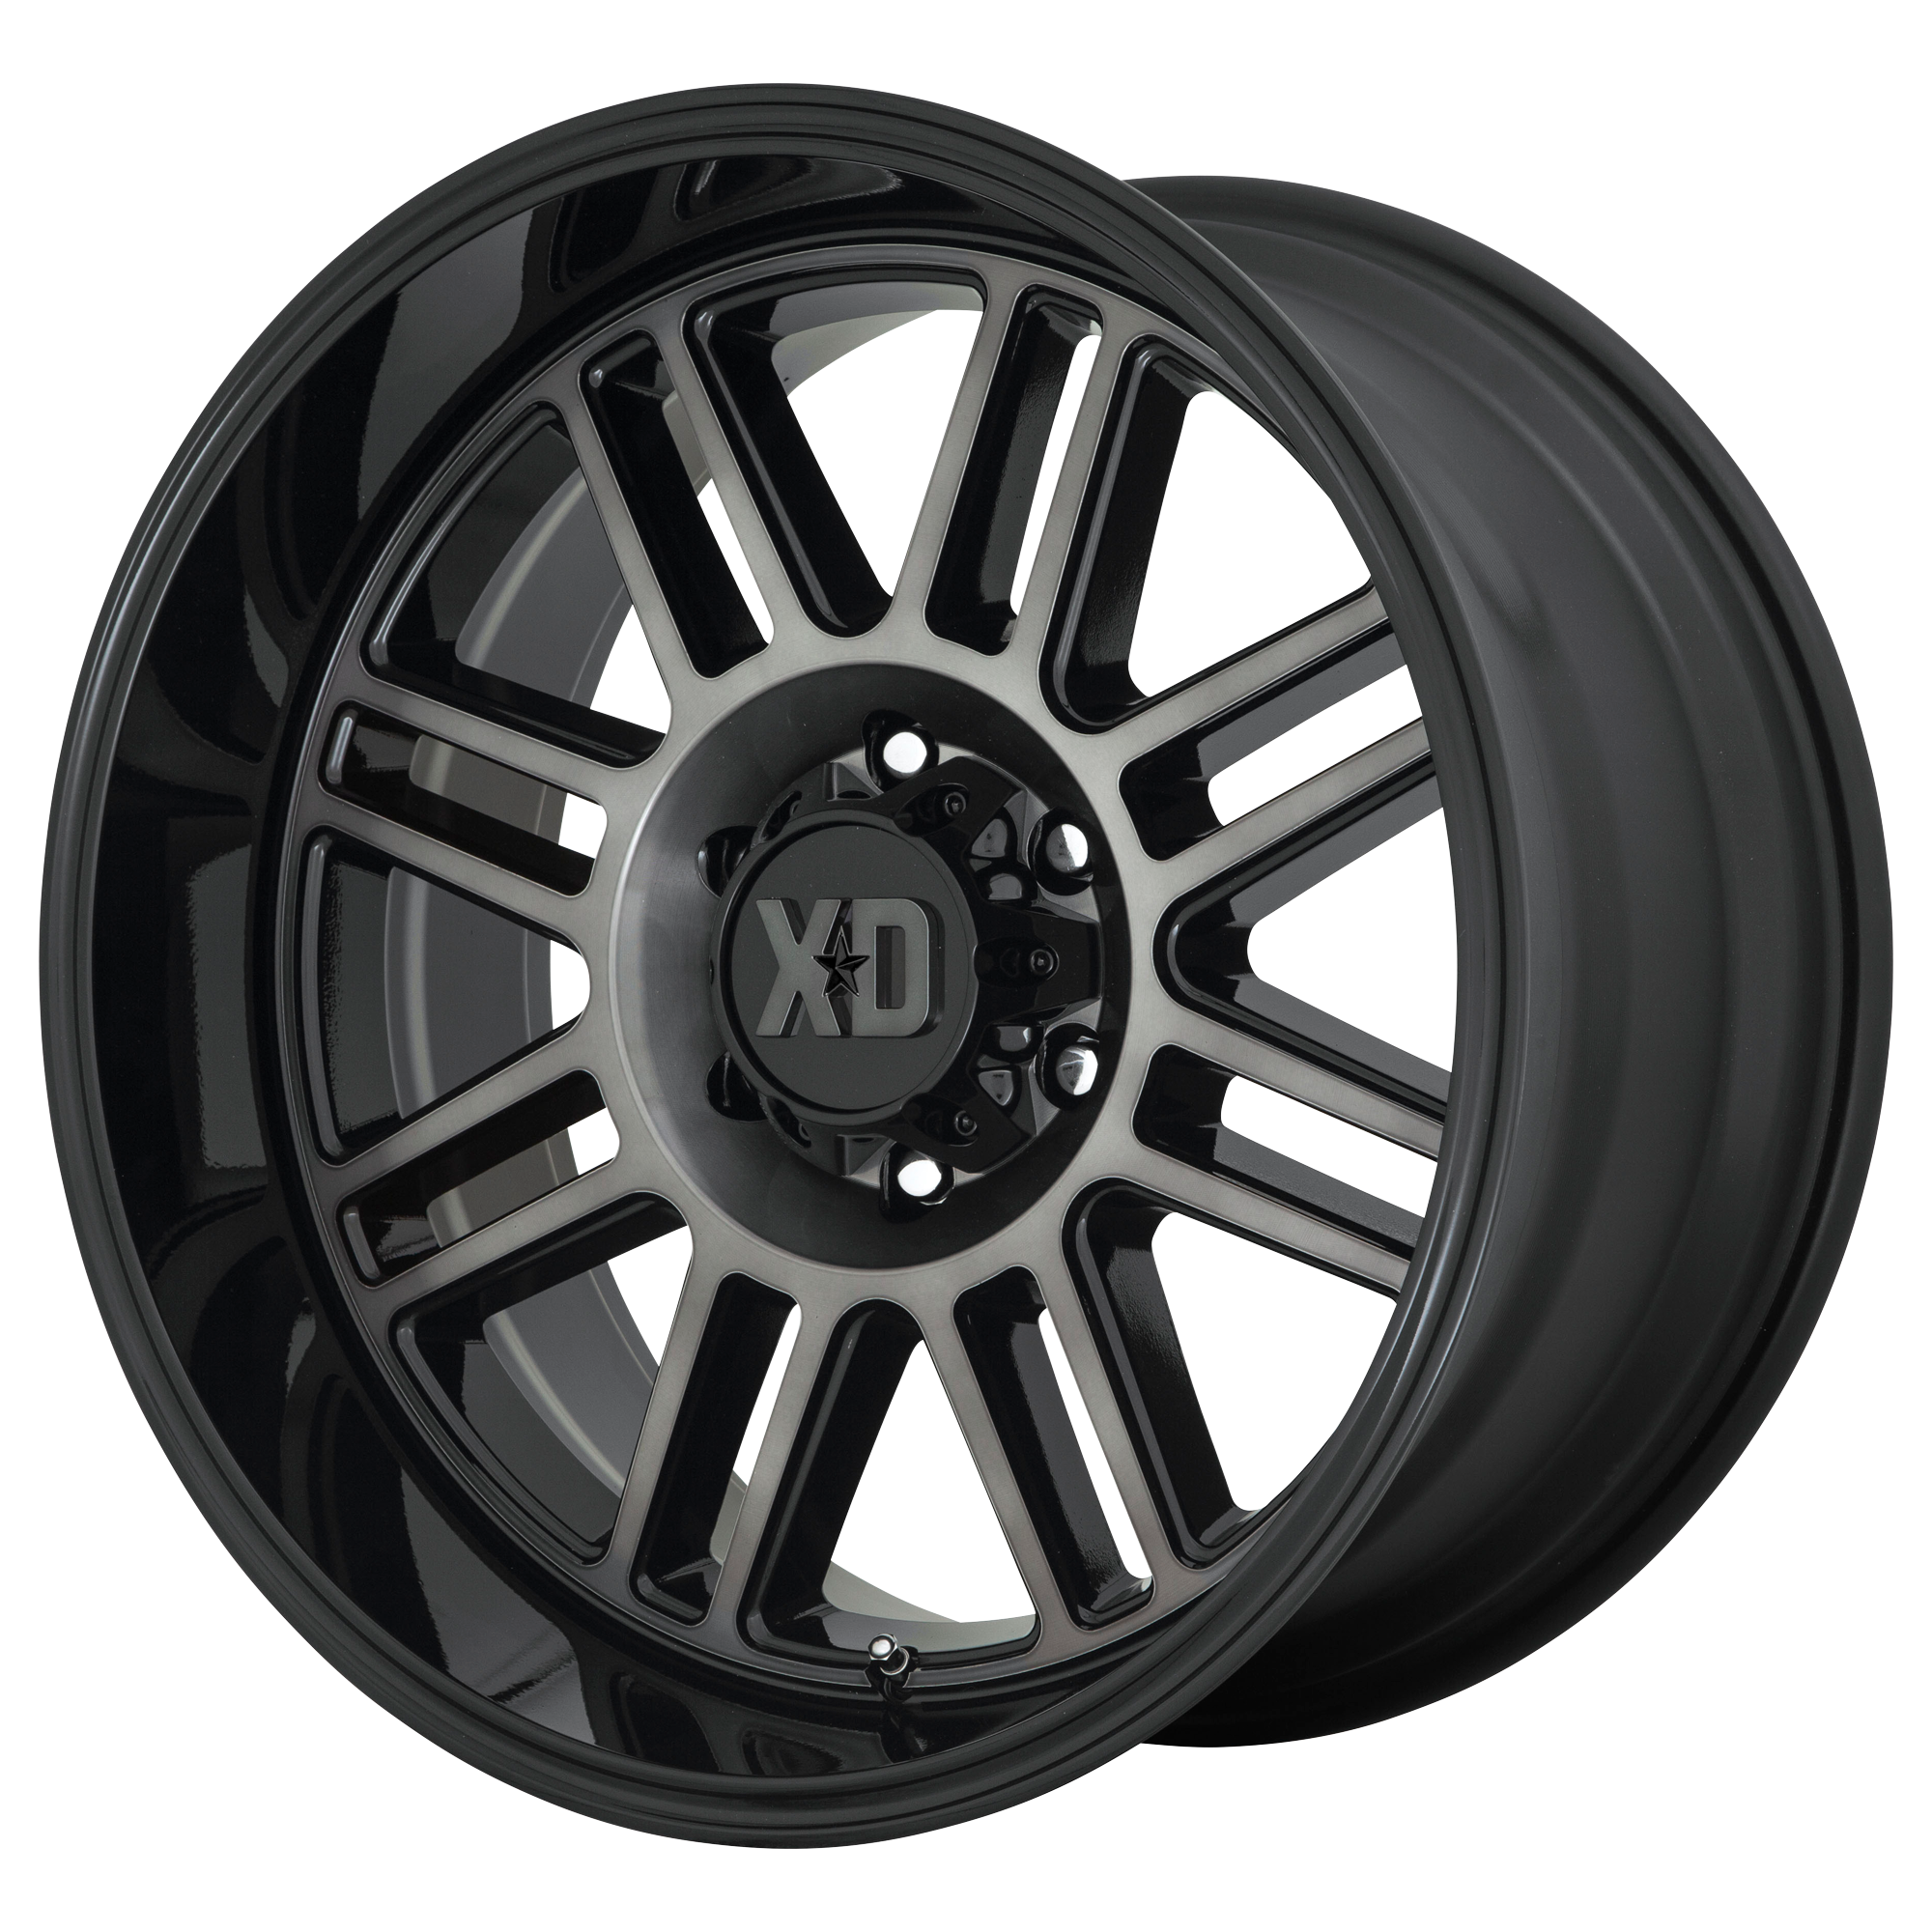 CAGE 20x10 6x139.70 GLOSS BLACK W/ GRAY TINT (-18 mm) - Tires and Engine Performance